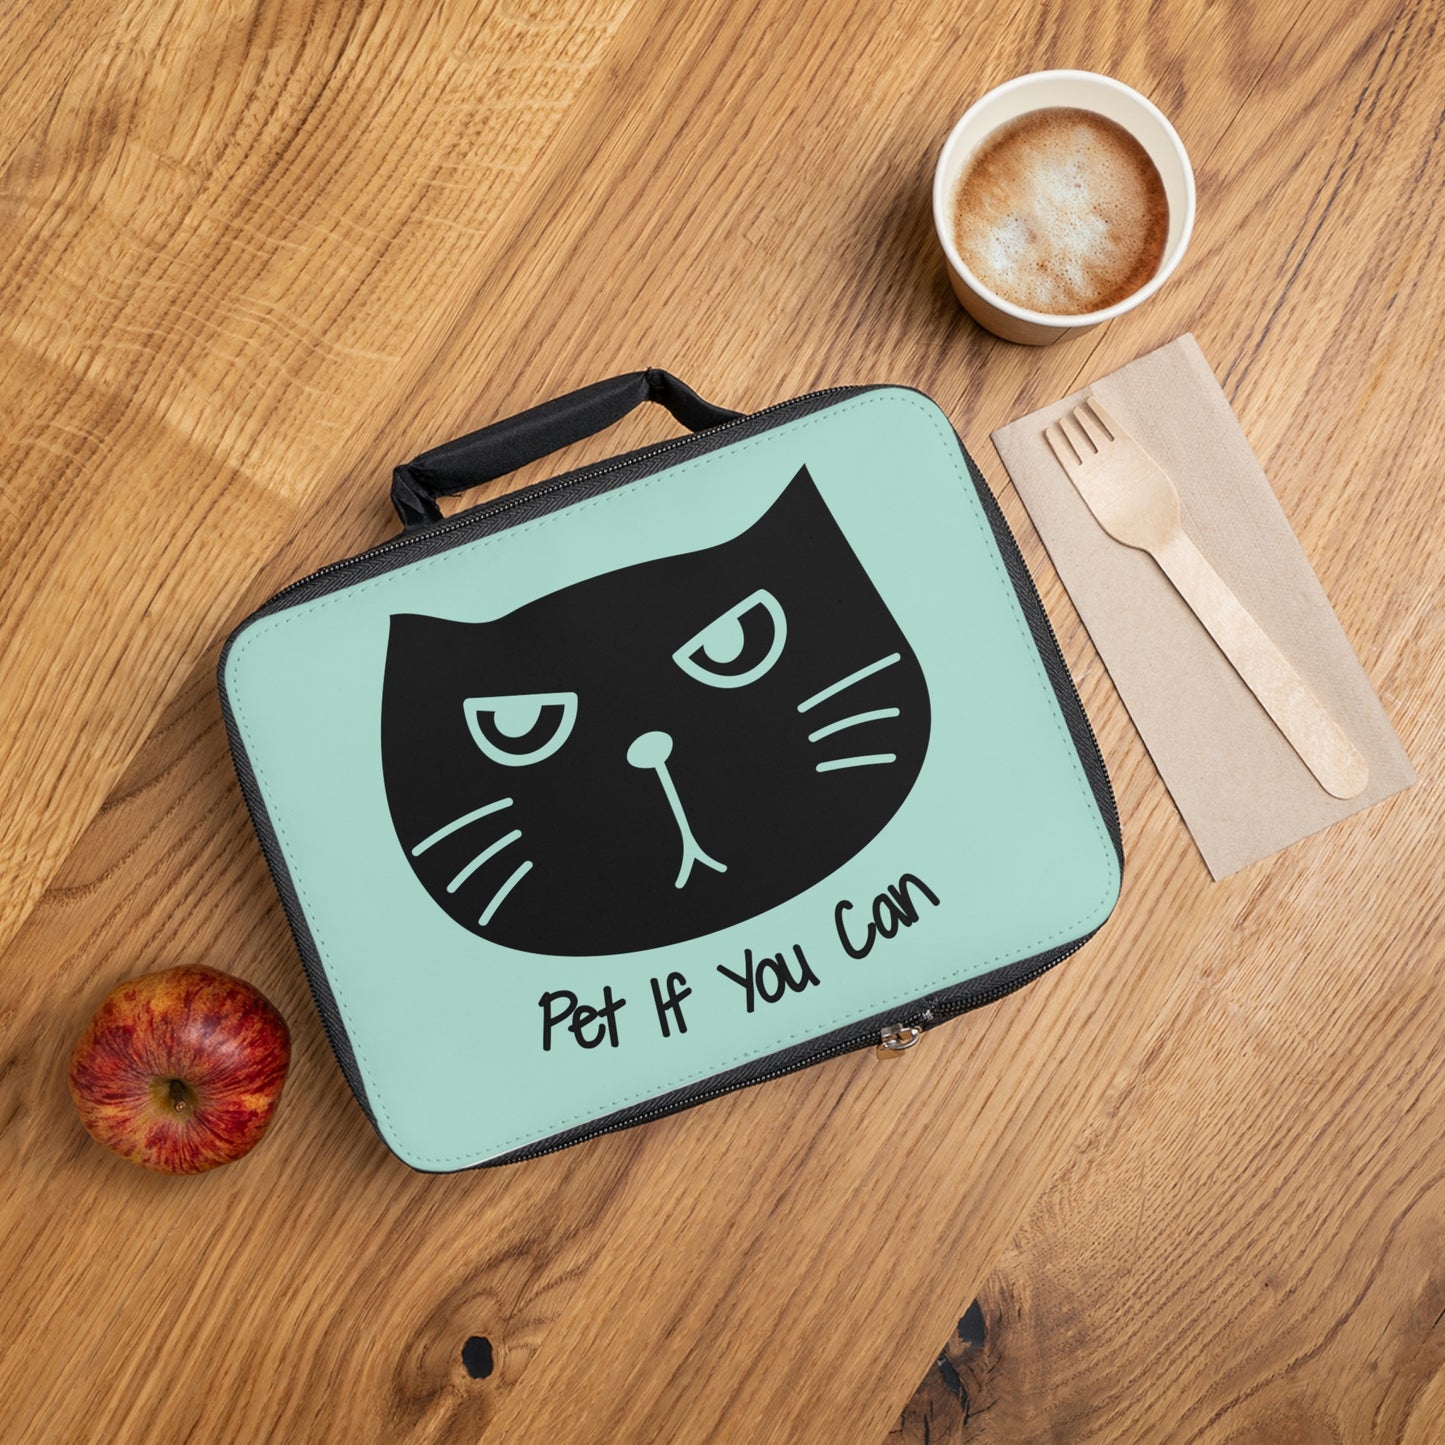 Funny cat lunch bag, cute kawaii cat lunch tote, Black cat says Pet if you can Lunch Bag